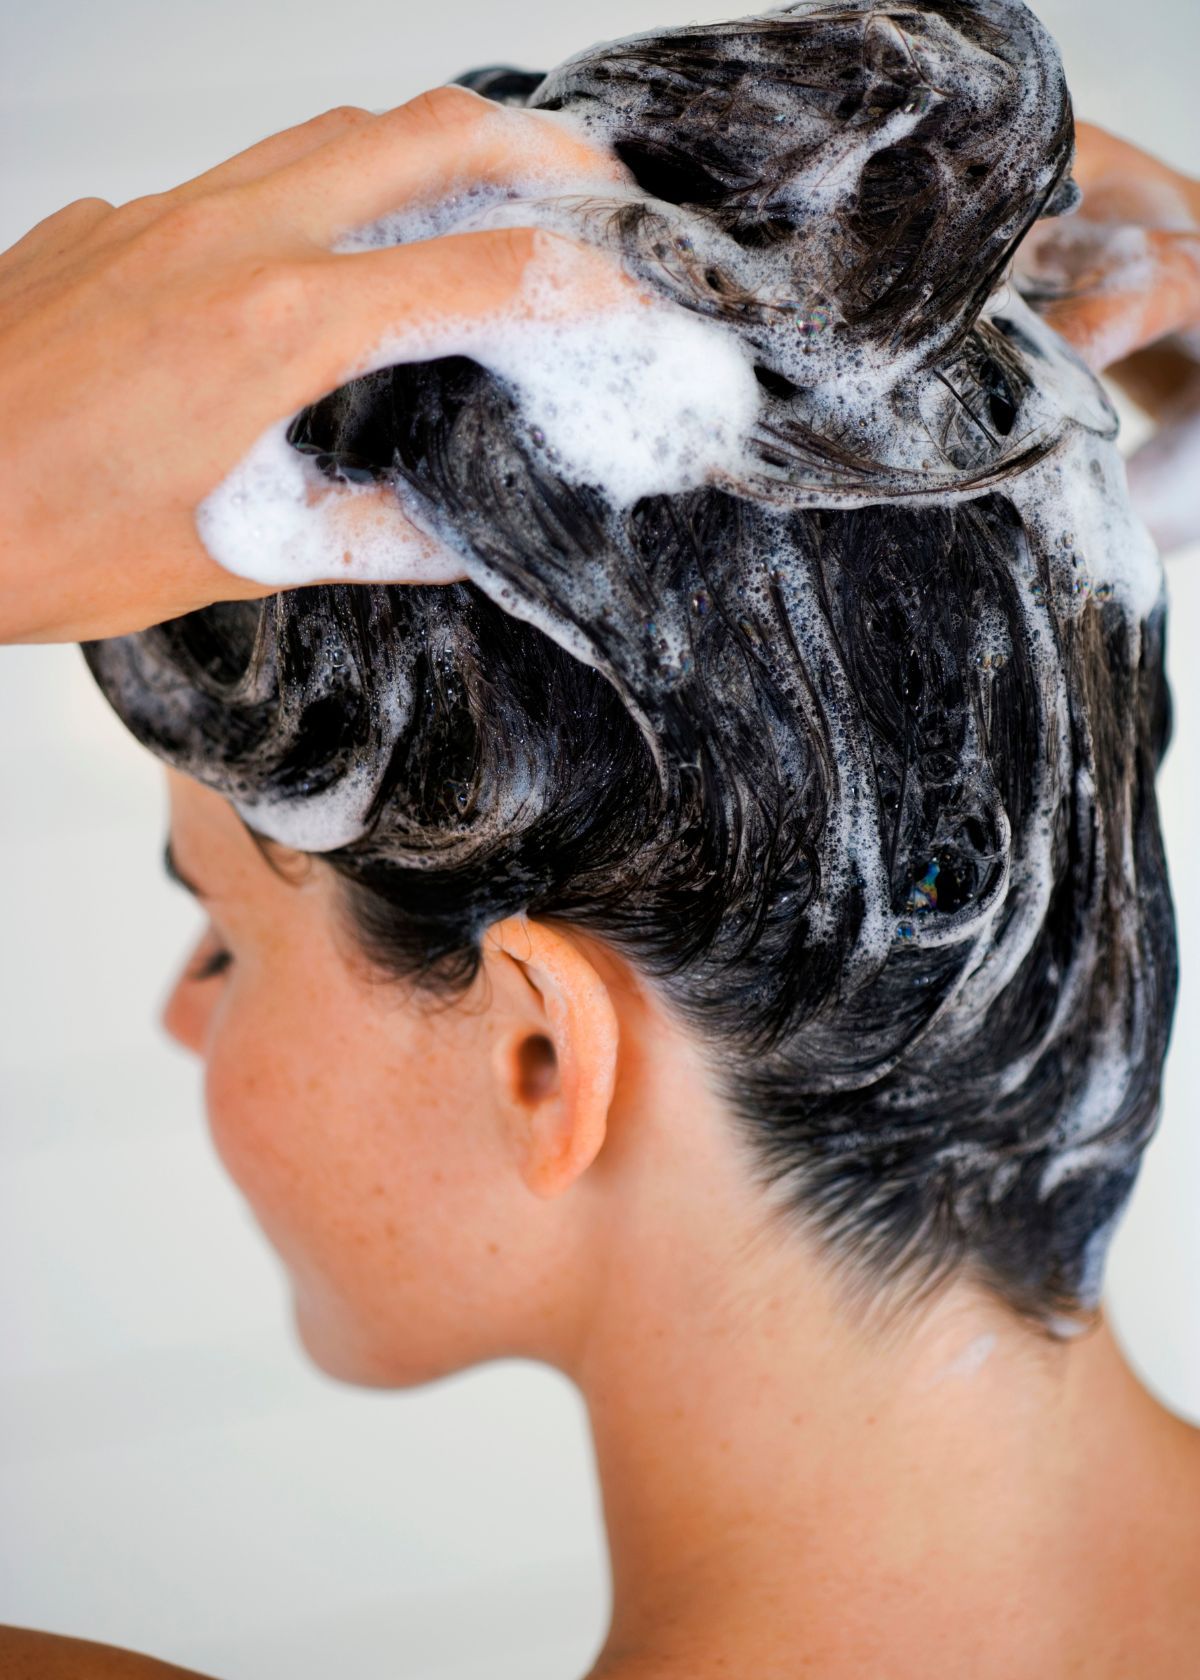 Best Shampoo For Smelly Hair